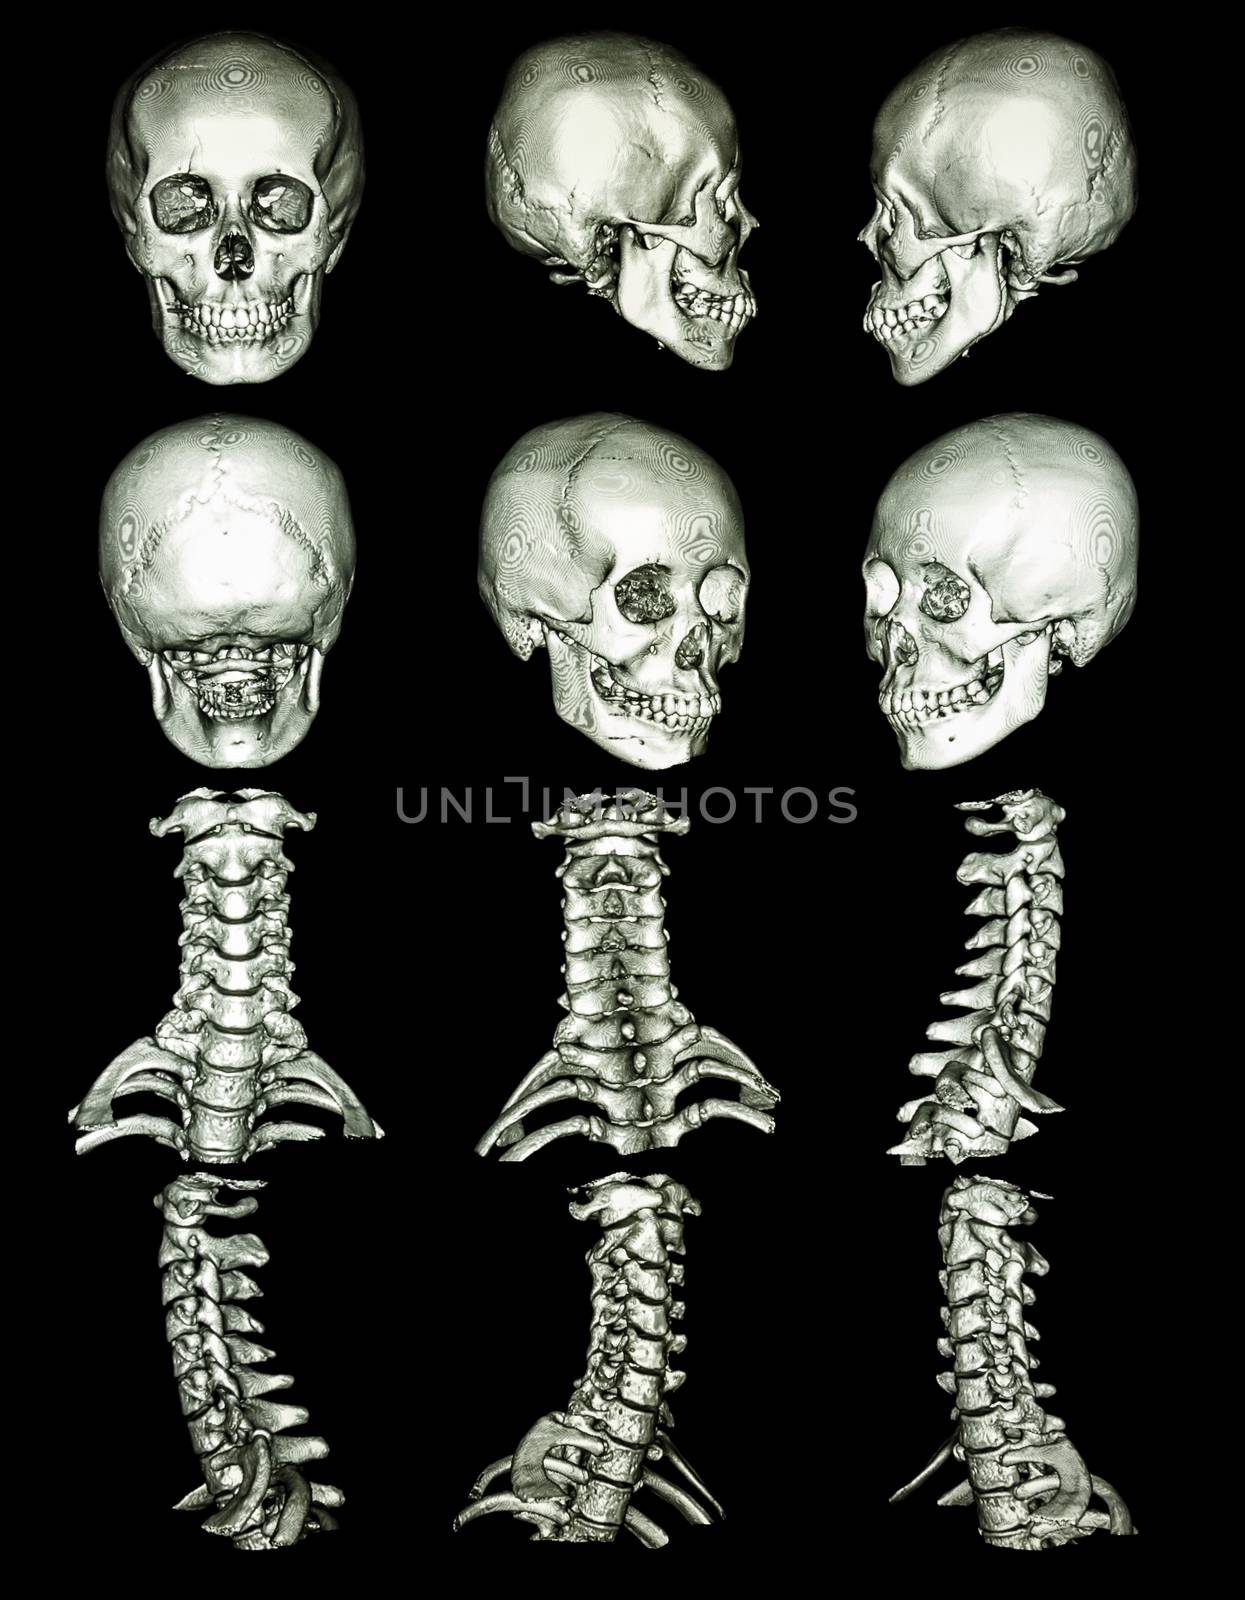 CT scan (Computed tomography) with 3D graphic show normal human's skull and cervial spine